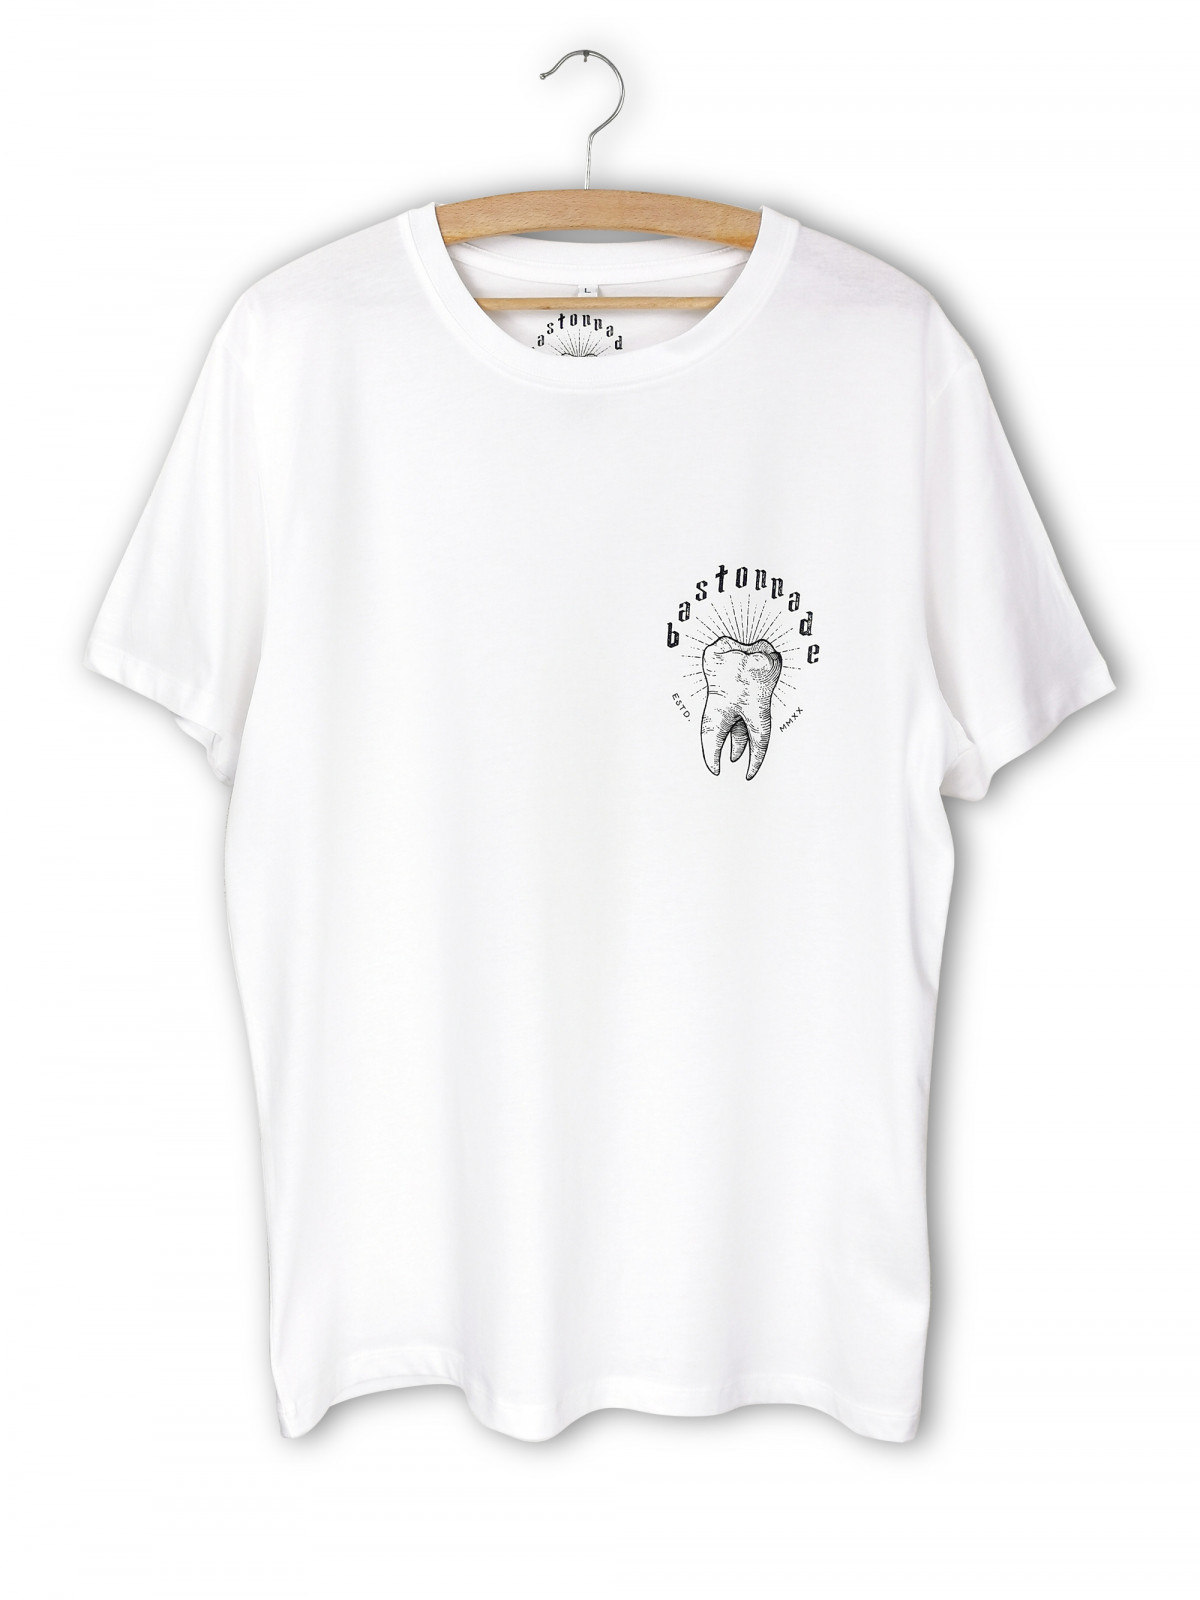 'Classic Logo' tee (organic coton) for men and women by swiss streetwear brand bastonnade clothing